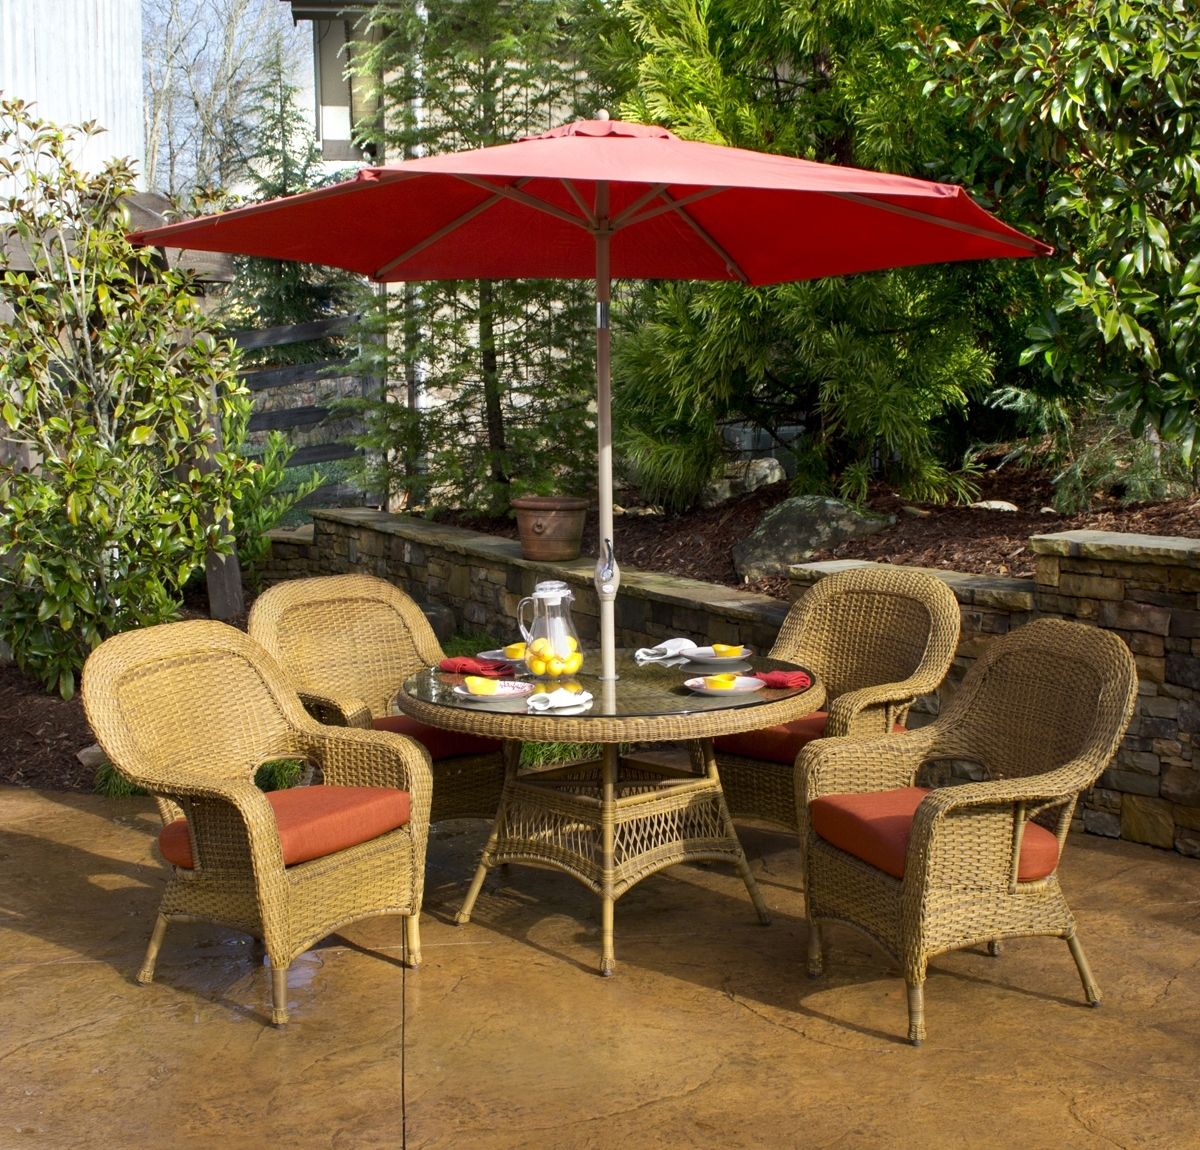 Small Patio Umbrellas In Latest Famous Small Patio Umbrella : Life On The Move – Nice Small Patio (View 7 of 20)